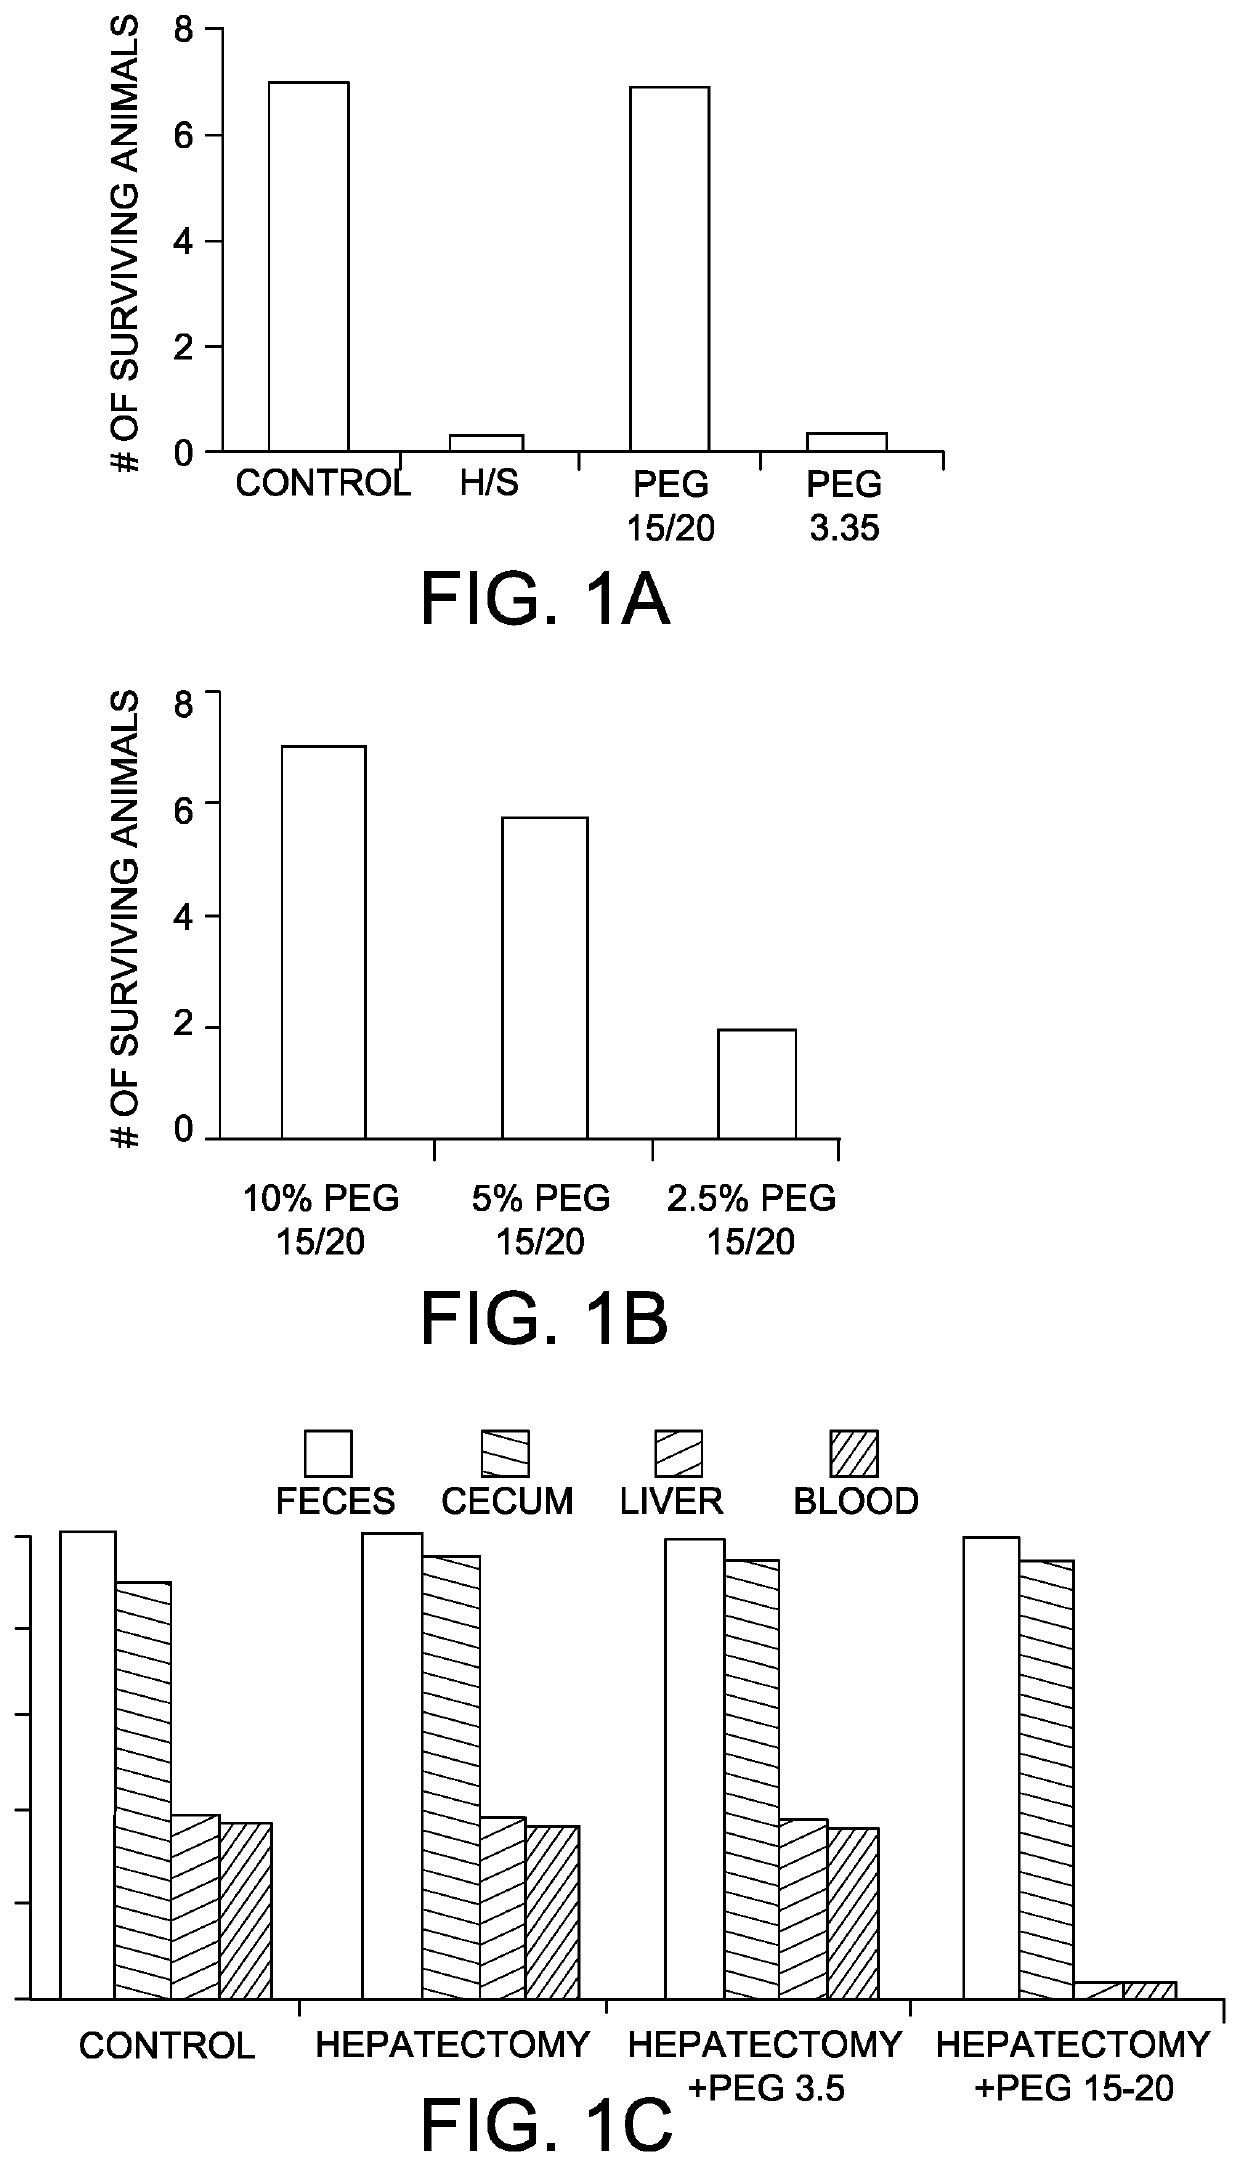 Methods for Preventing and Treating Radiation-Induced Epithelial Disorders